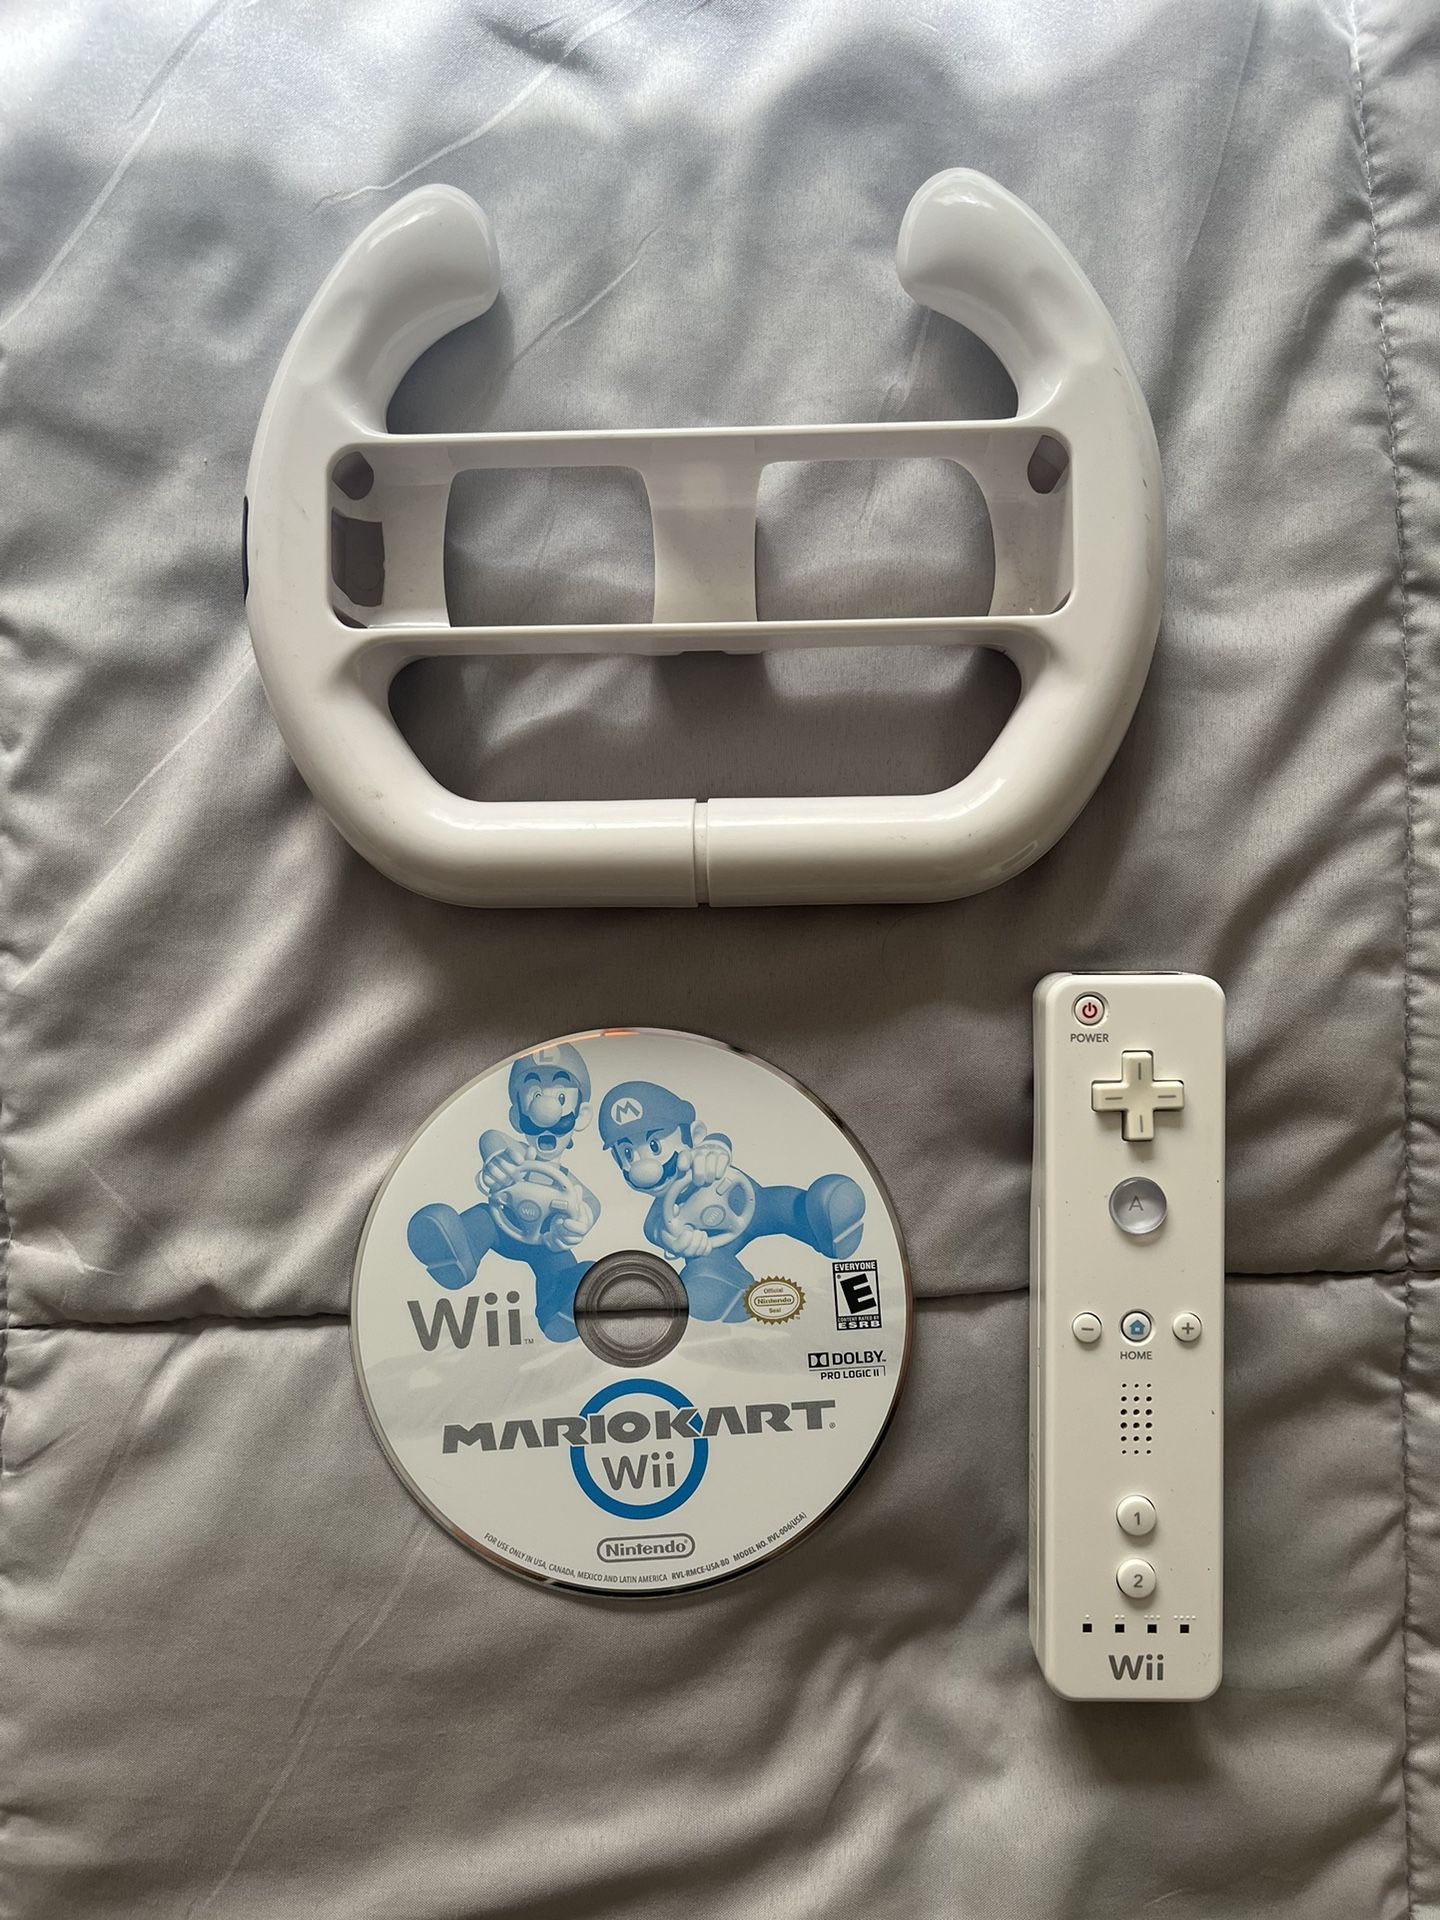 Mario Kart Wii (Nintendo Wii, 2008) With Wheel And Controller